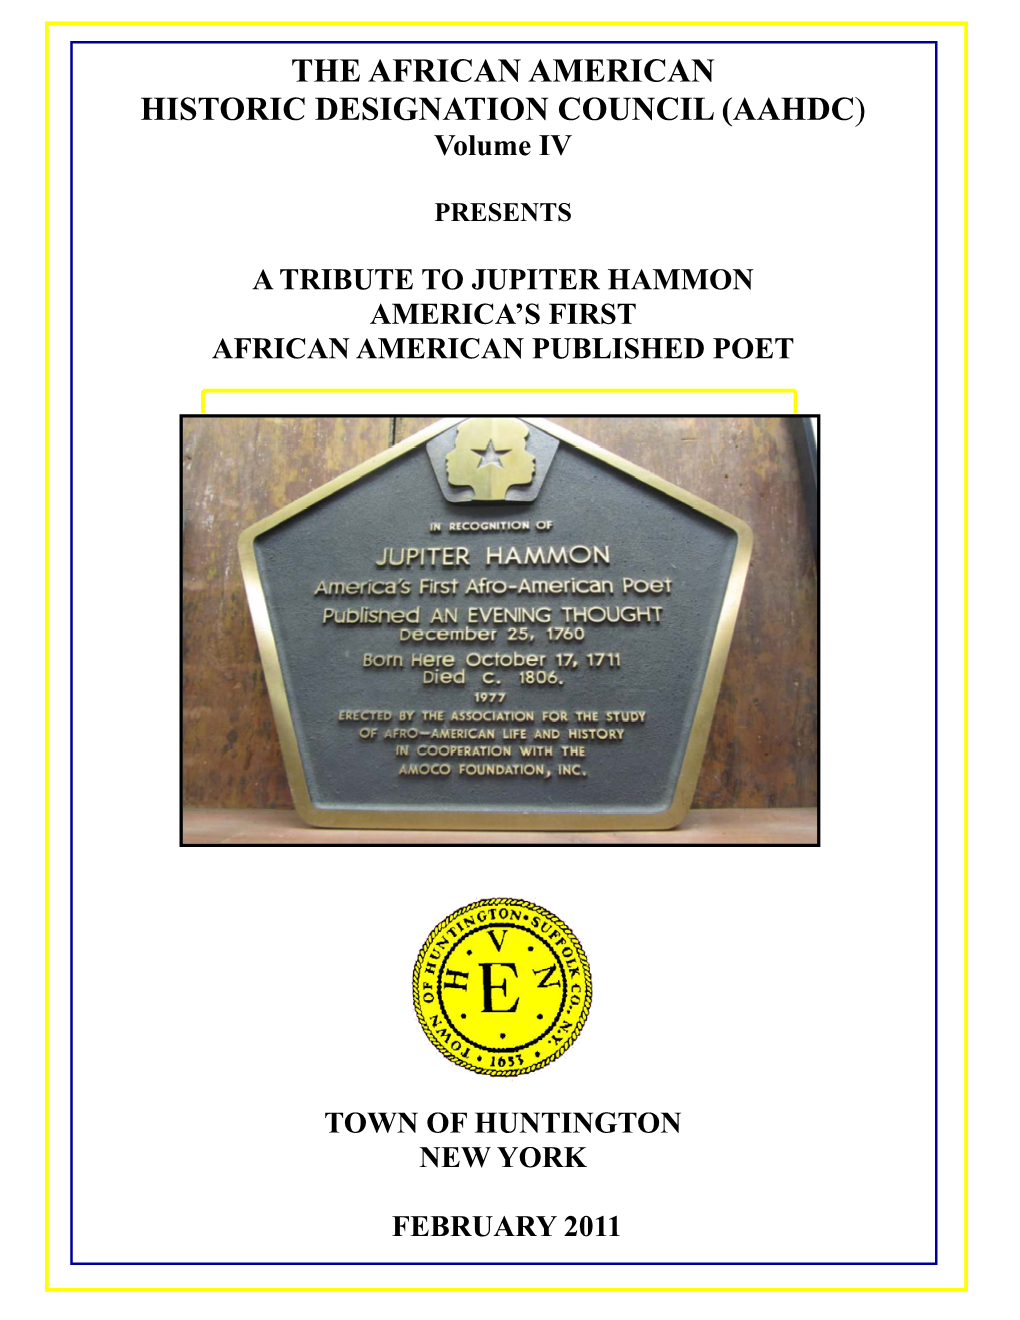 THE AFRICAN AMERICAN HISTORIC DESIGNATION COUNCIL (AAHDC) Volume IV